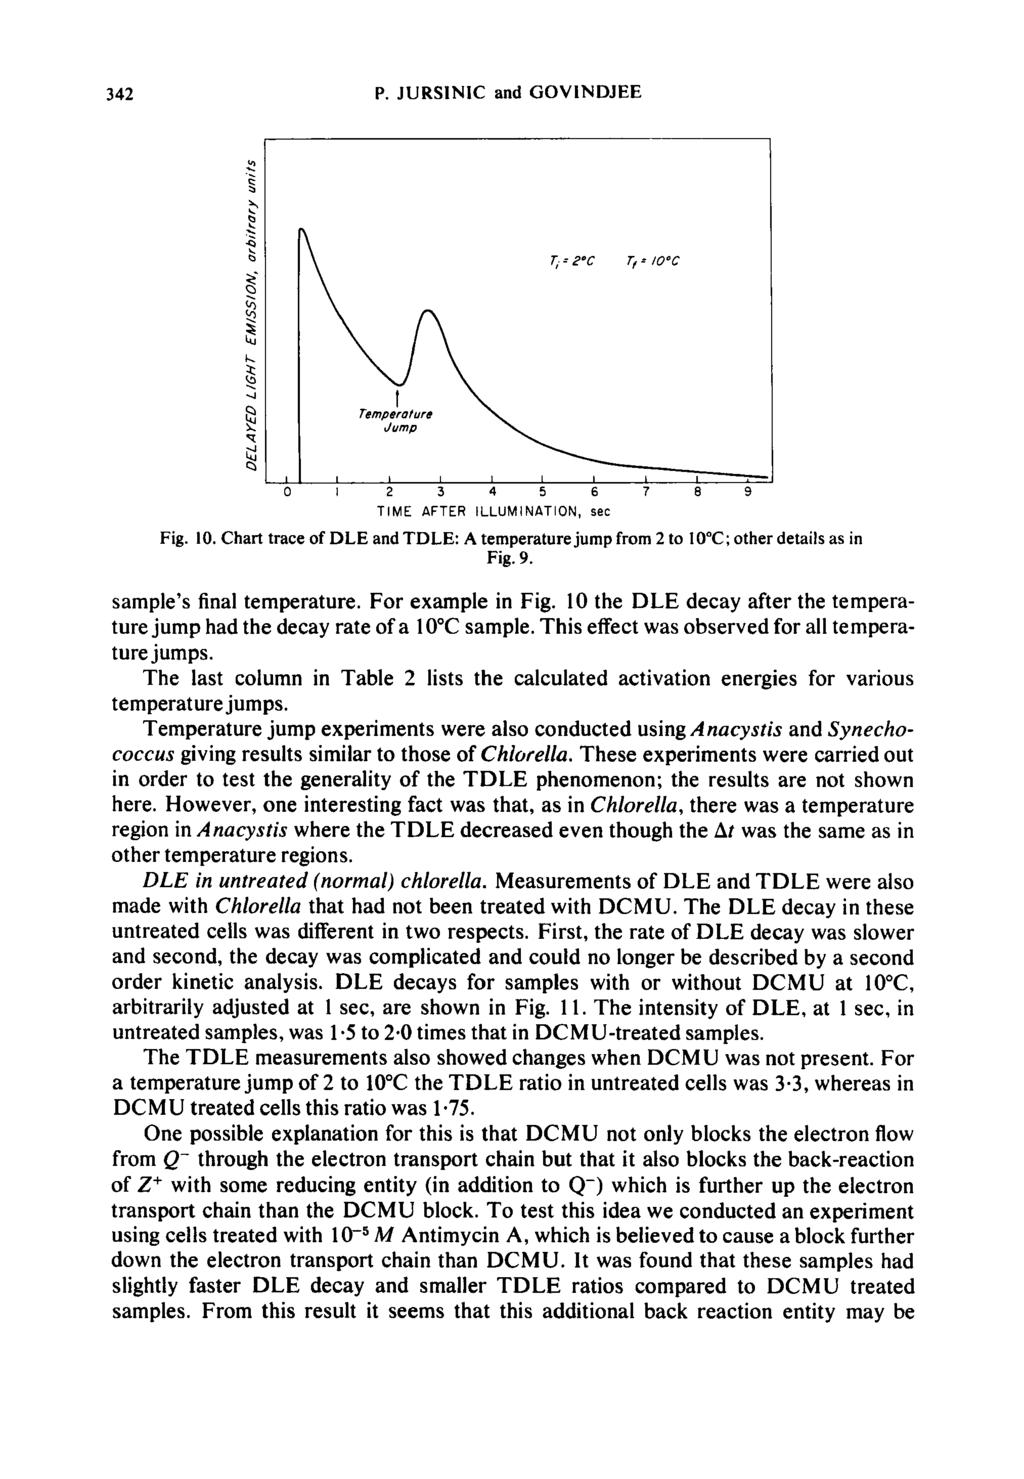 342 P. JURSlNlC and GOVINDJEE TIME AFTER ILLUMINATION, sec I; 9 Fig. 10. Chart trace of DLE and TDLE: A temperature jump from 2 to 10 C; other details as in Fig. 9. sample s final temperature.